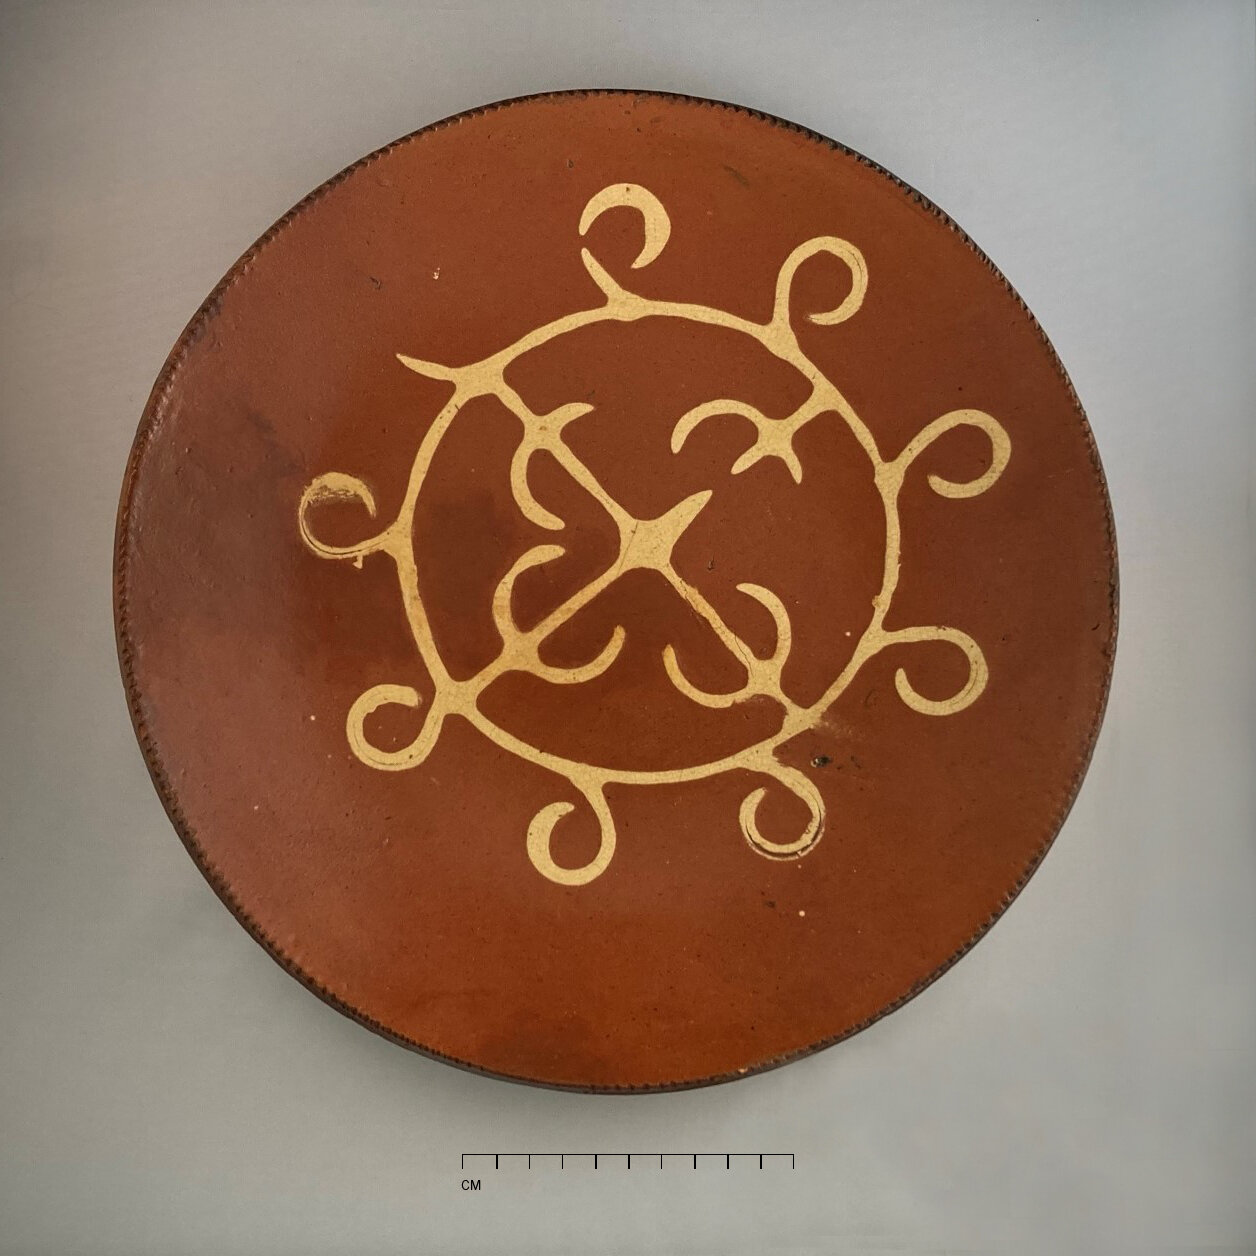   Redware plate (c.1805–1860), Huntington pottery, from Preservation Long Island’s local redwares collection.  Photographed by Allison McGovern 